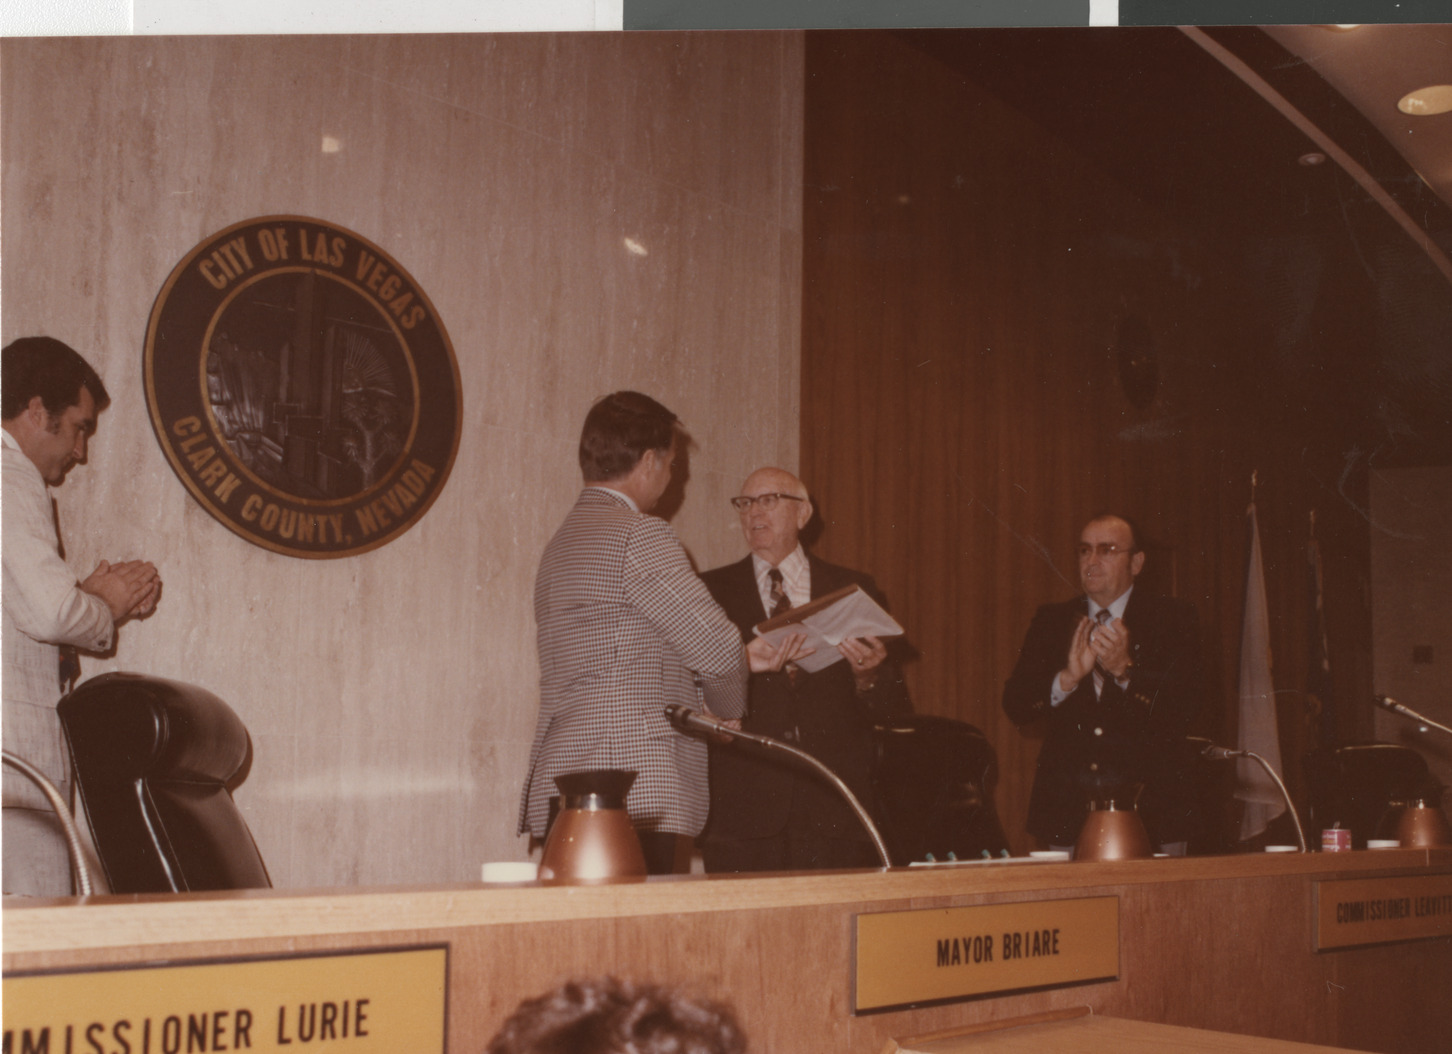 Photograph of Ron Lurie (left) and Mayor Briare presenting award, circa 1978